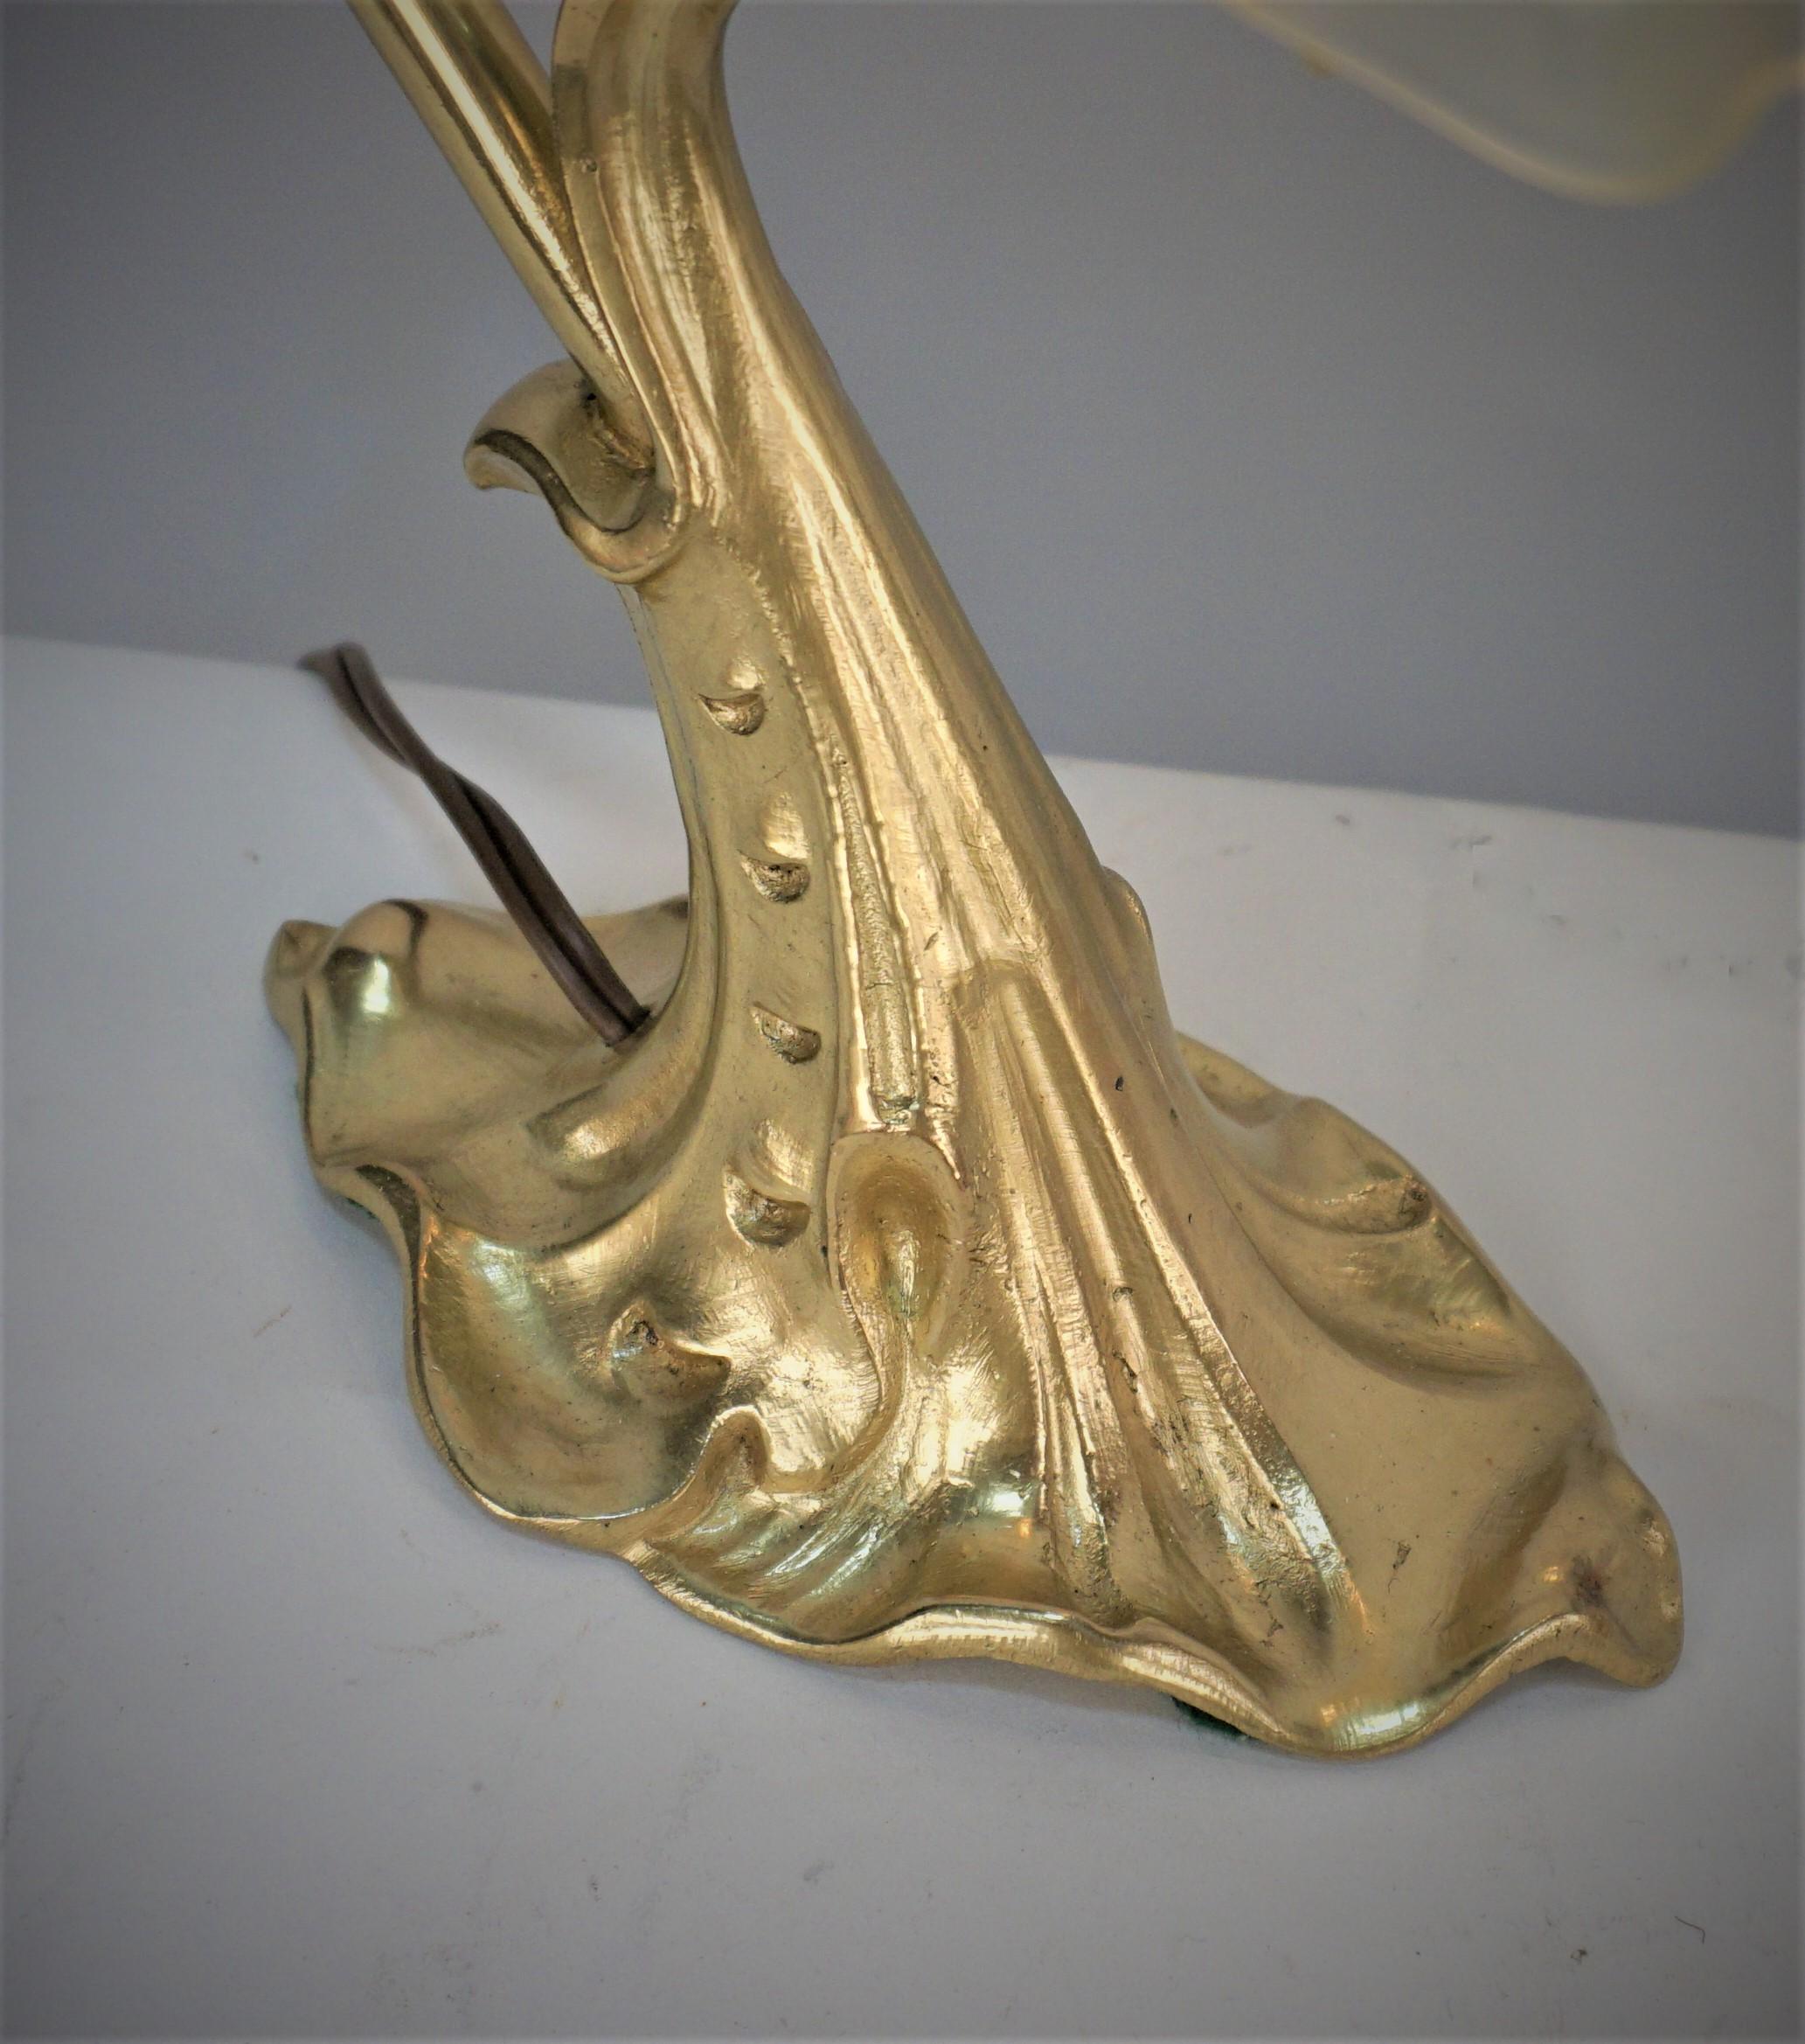 An art nouveau bronze adjustable neck desk or table lamp with beautiful opaline glass shade.